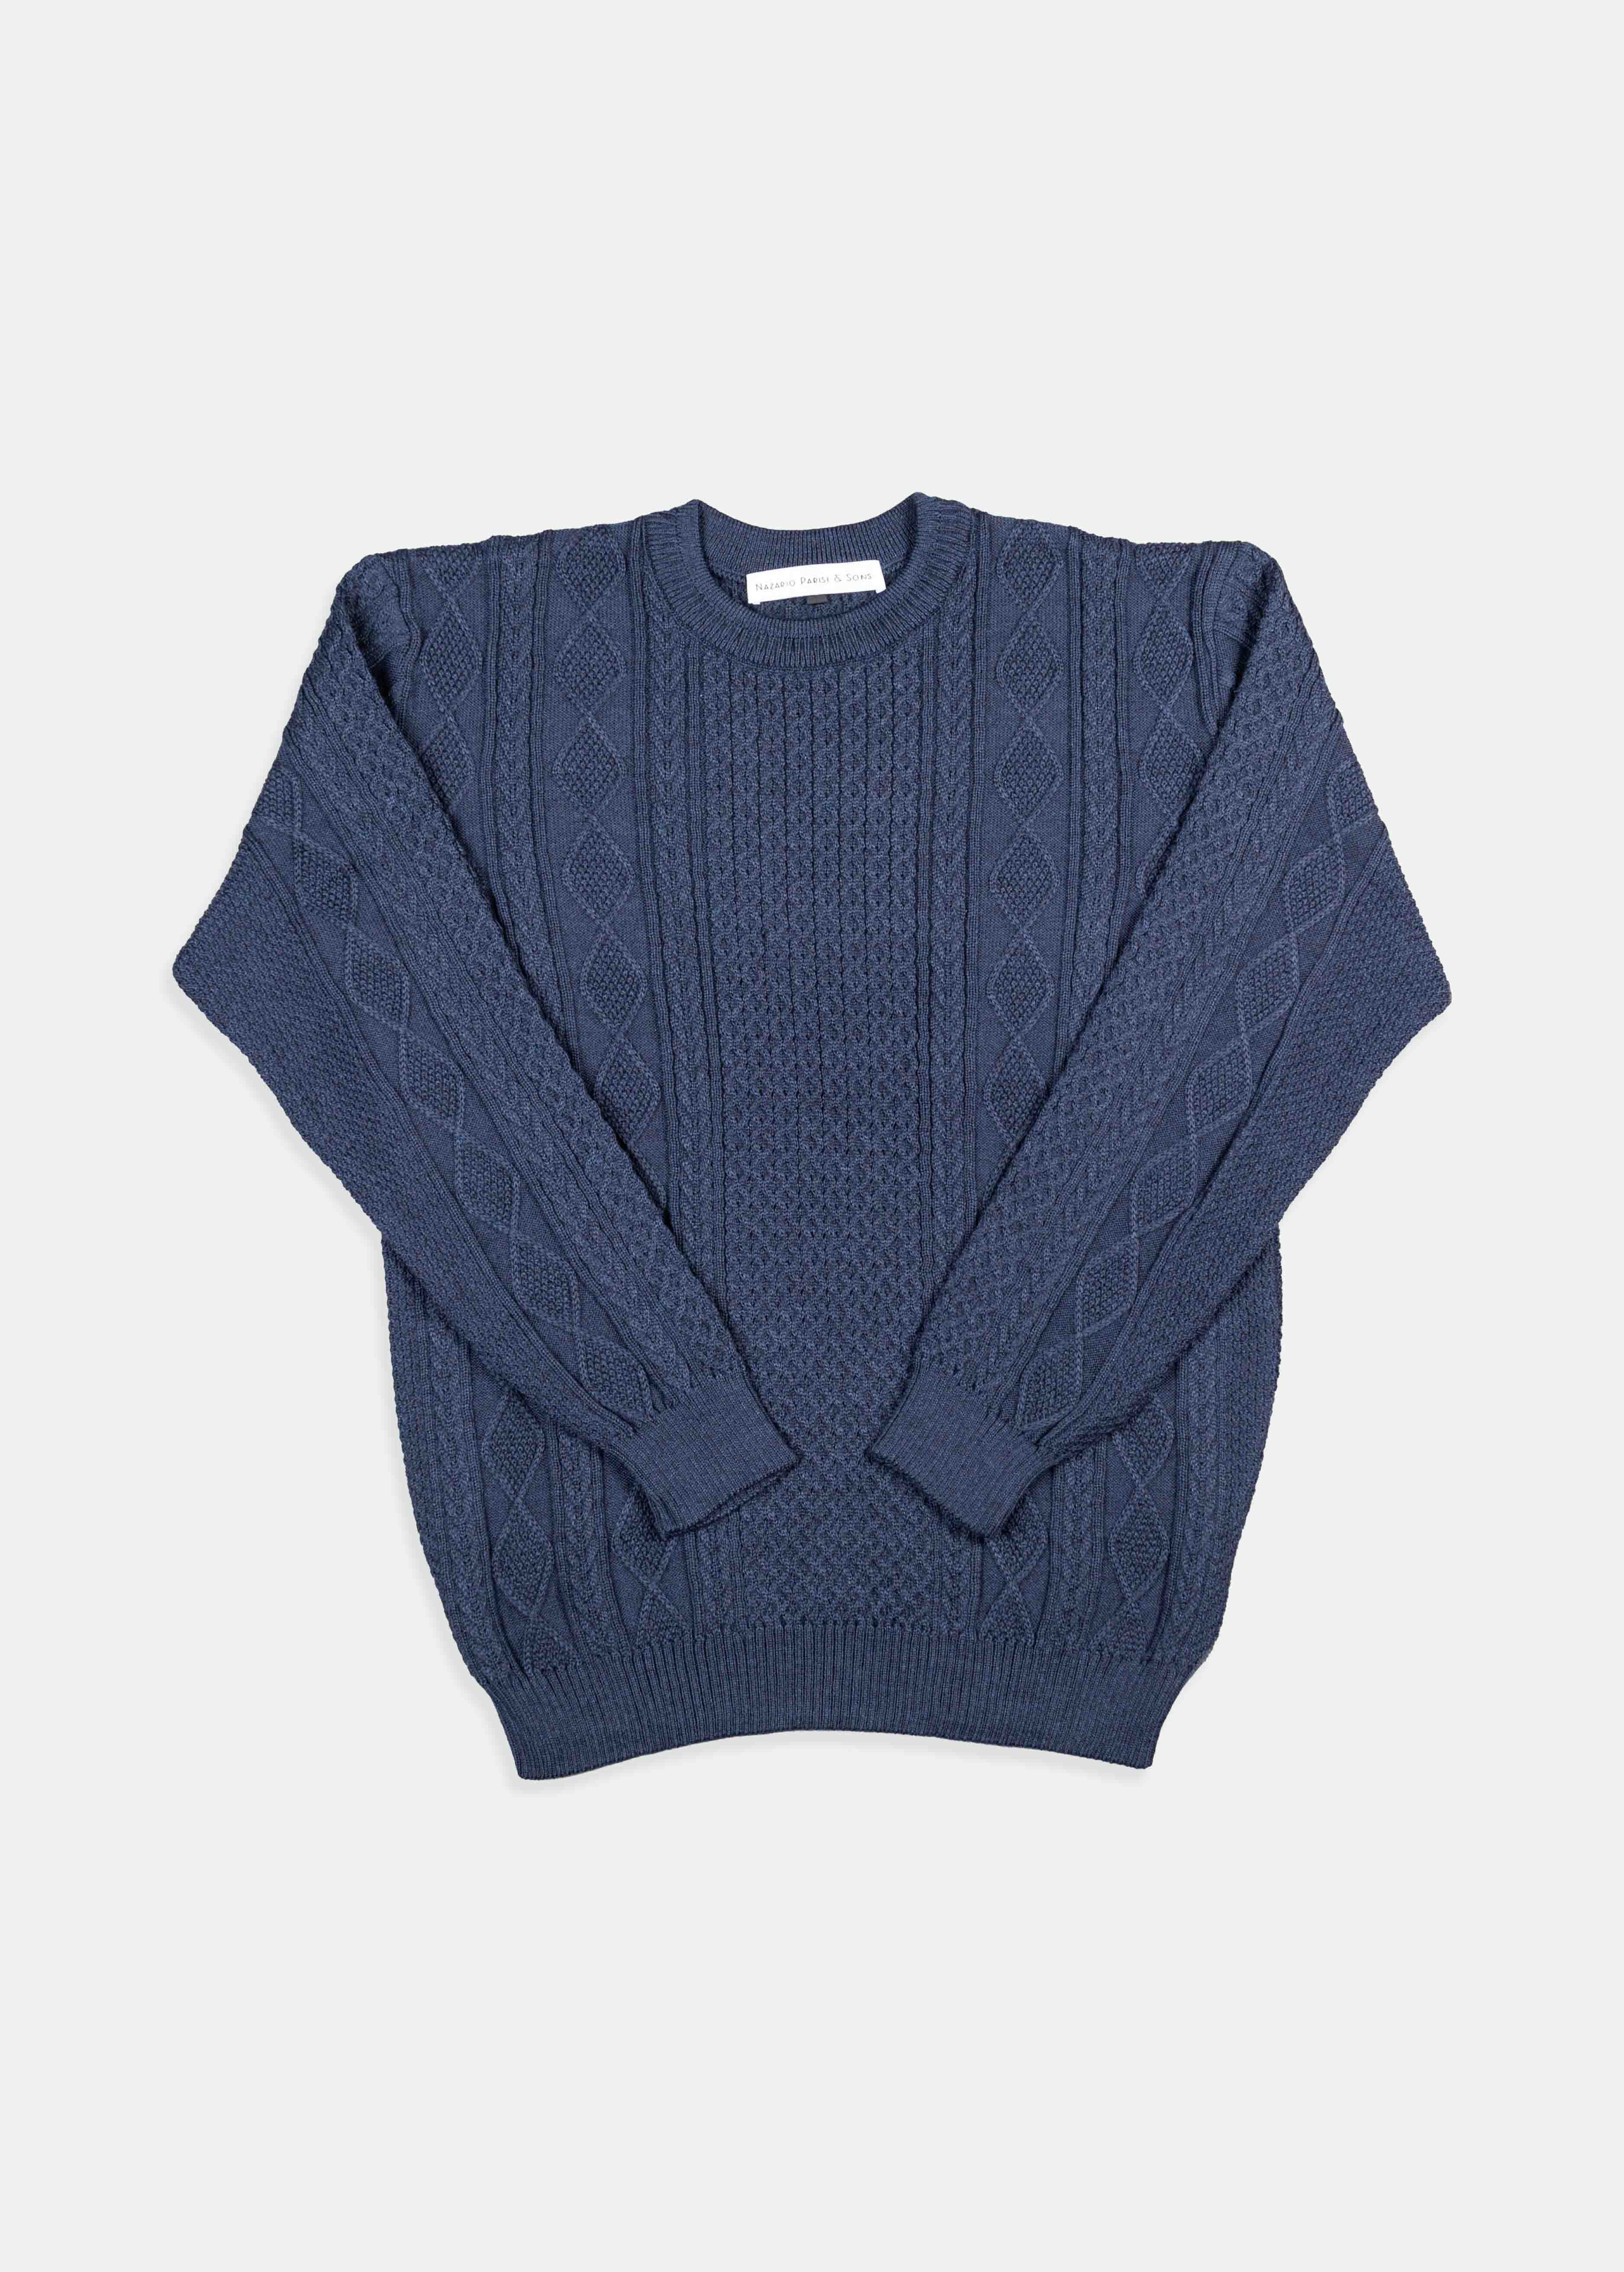 Navy Honeycomb Cable Knit